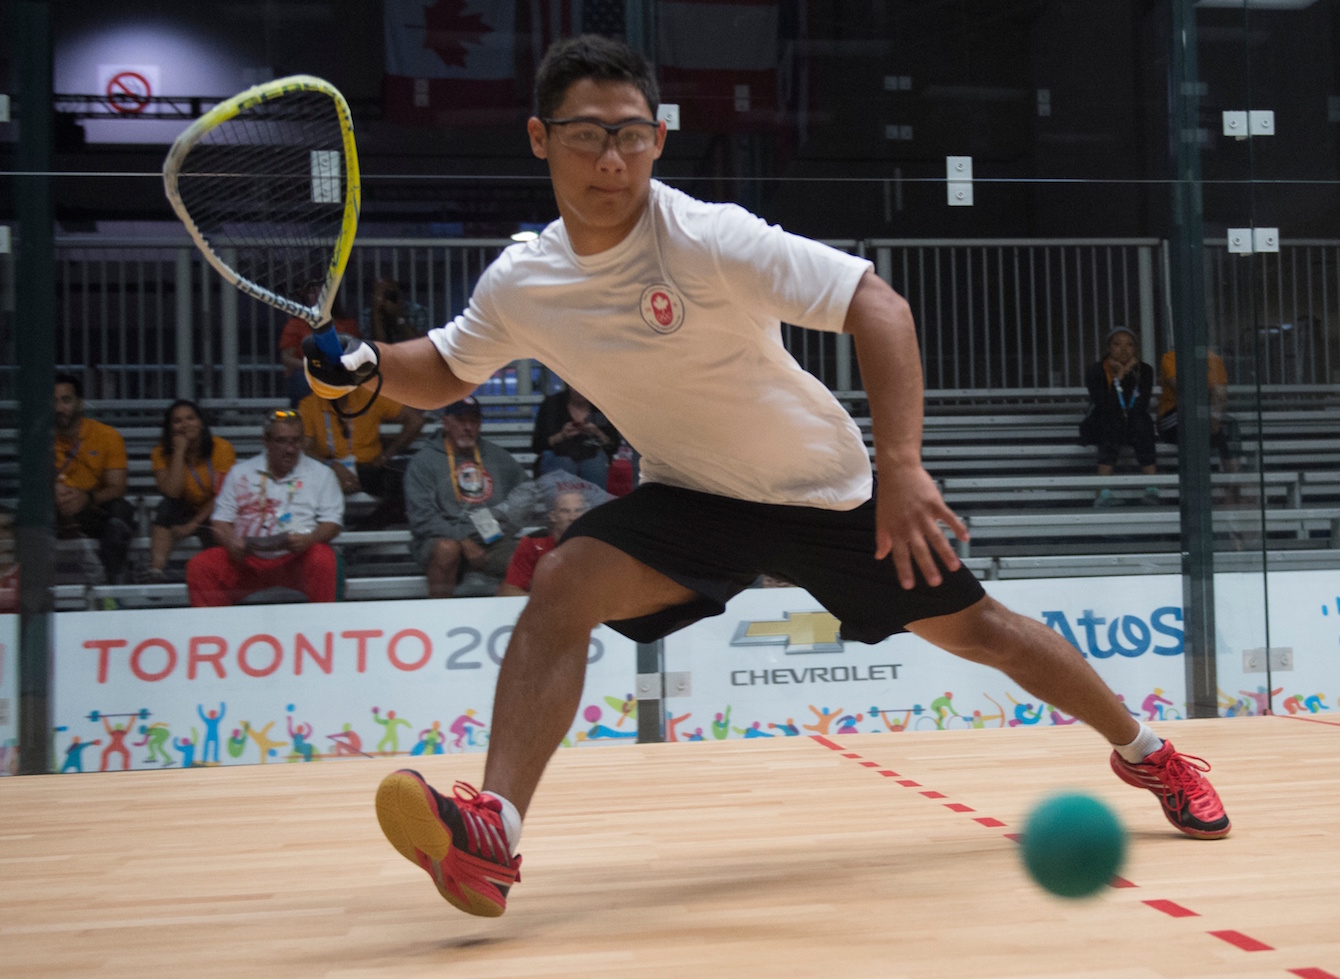 Coby Iwaasa in racquetball preliminary action at the Pan American Games in Toronto, July 20, 2015. COC Photo by Jason Ransom